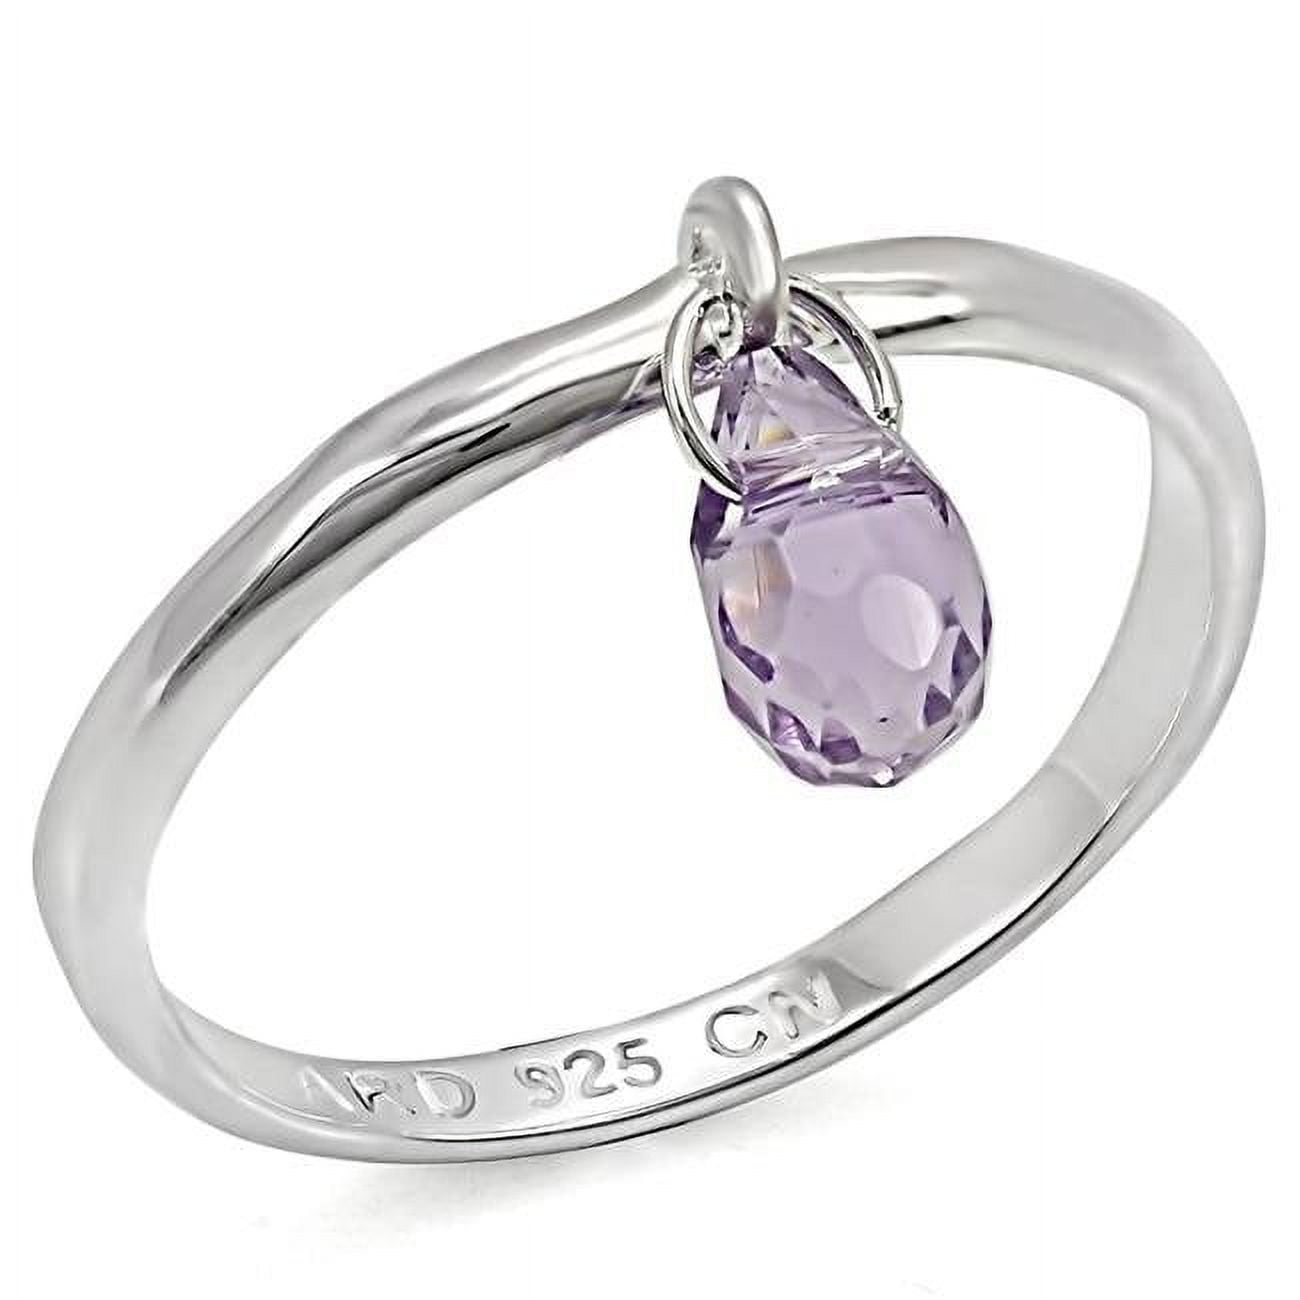 Picture of Alamode LOS325-6 Women Silver 925 Sterling Silver Ring with Genuine Stone in Amethyst - Size 6